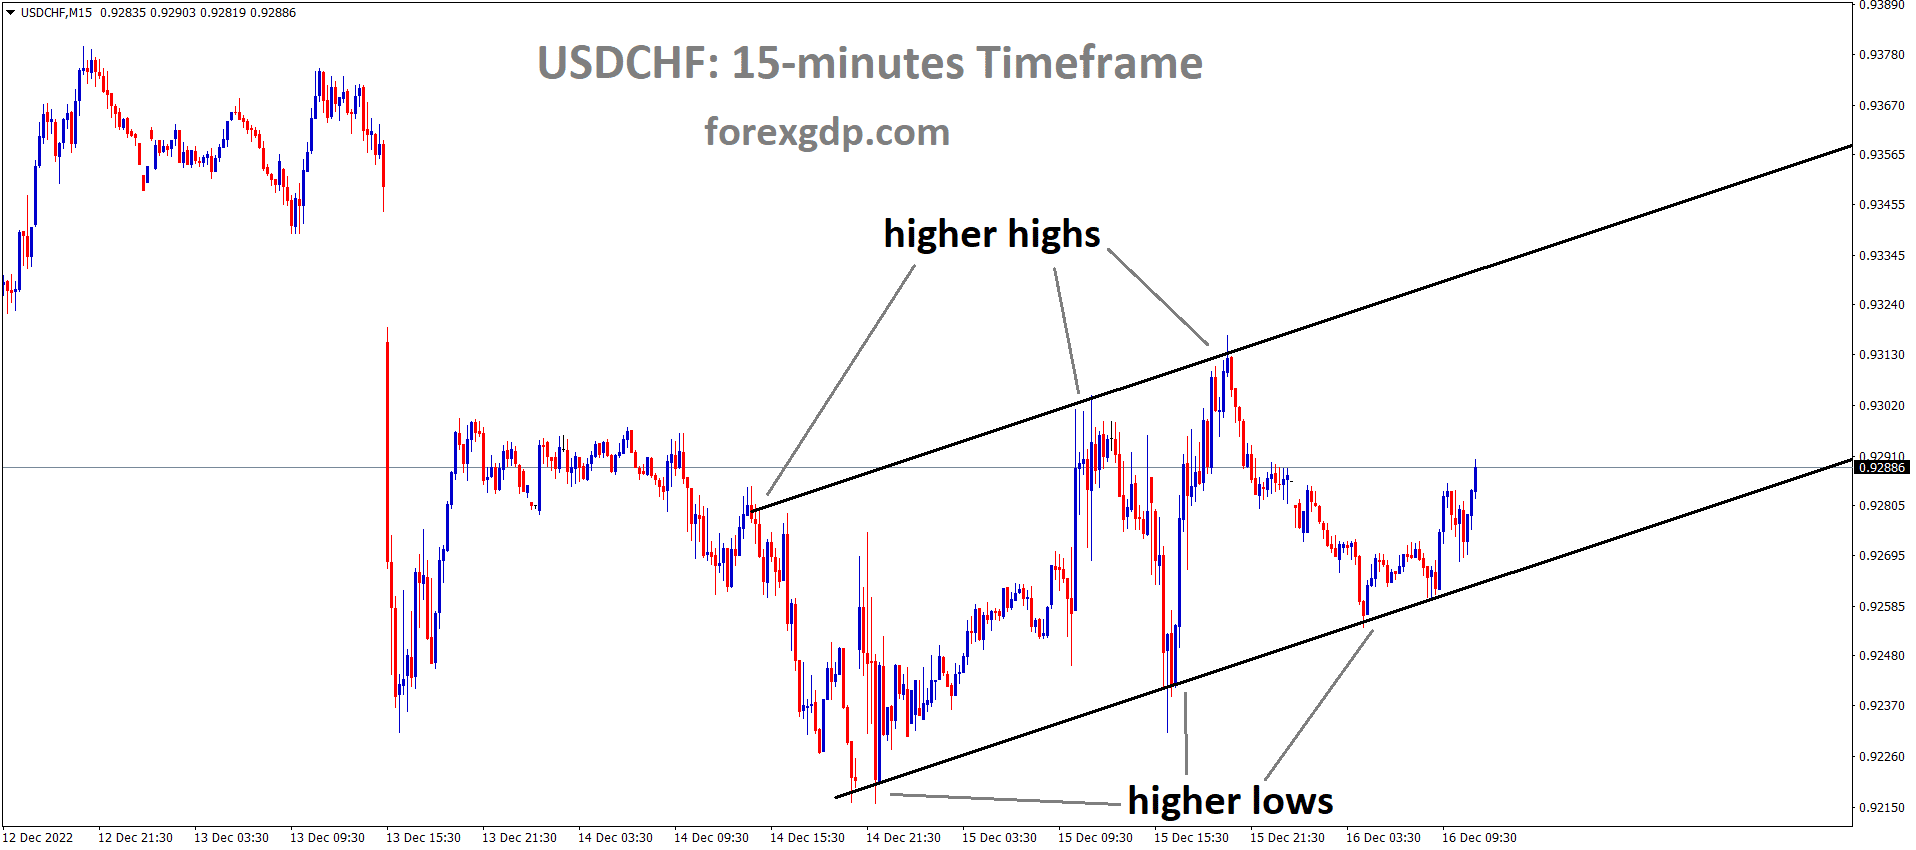 USDCHF is moving in an Ascending channel and the market has rebounded from the higher low area of the channel 1